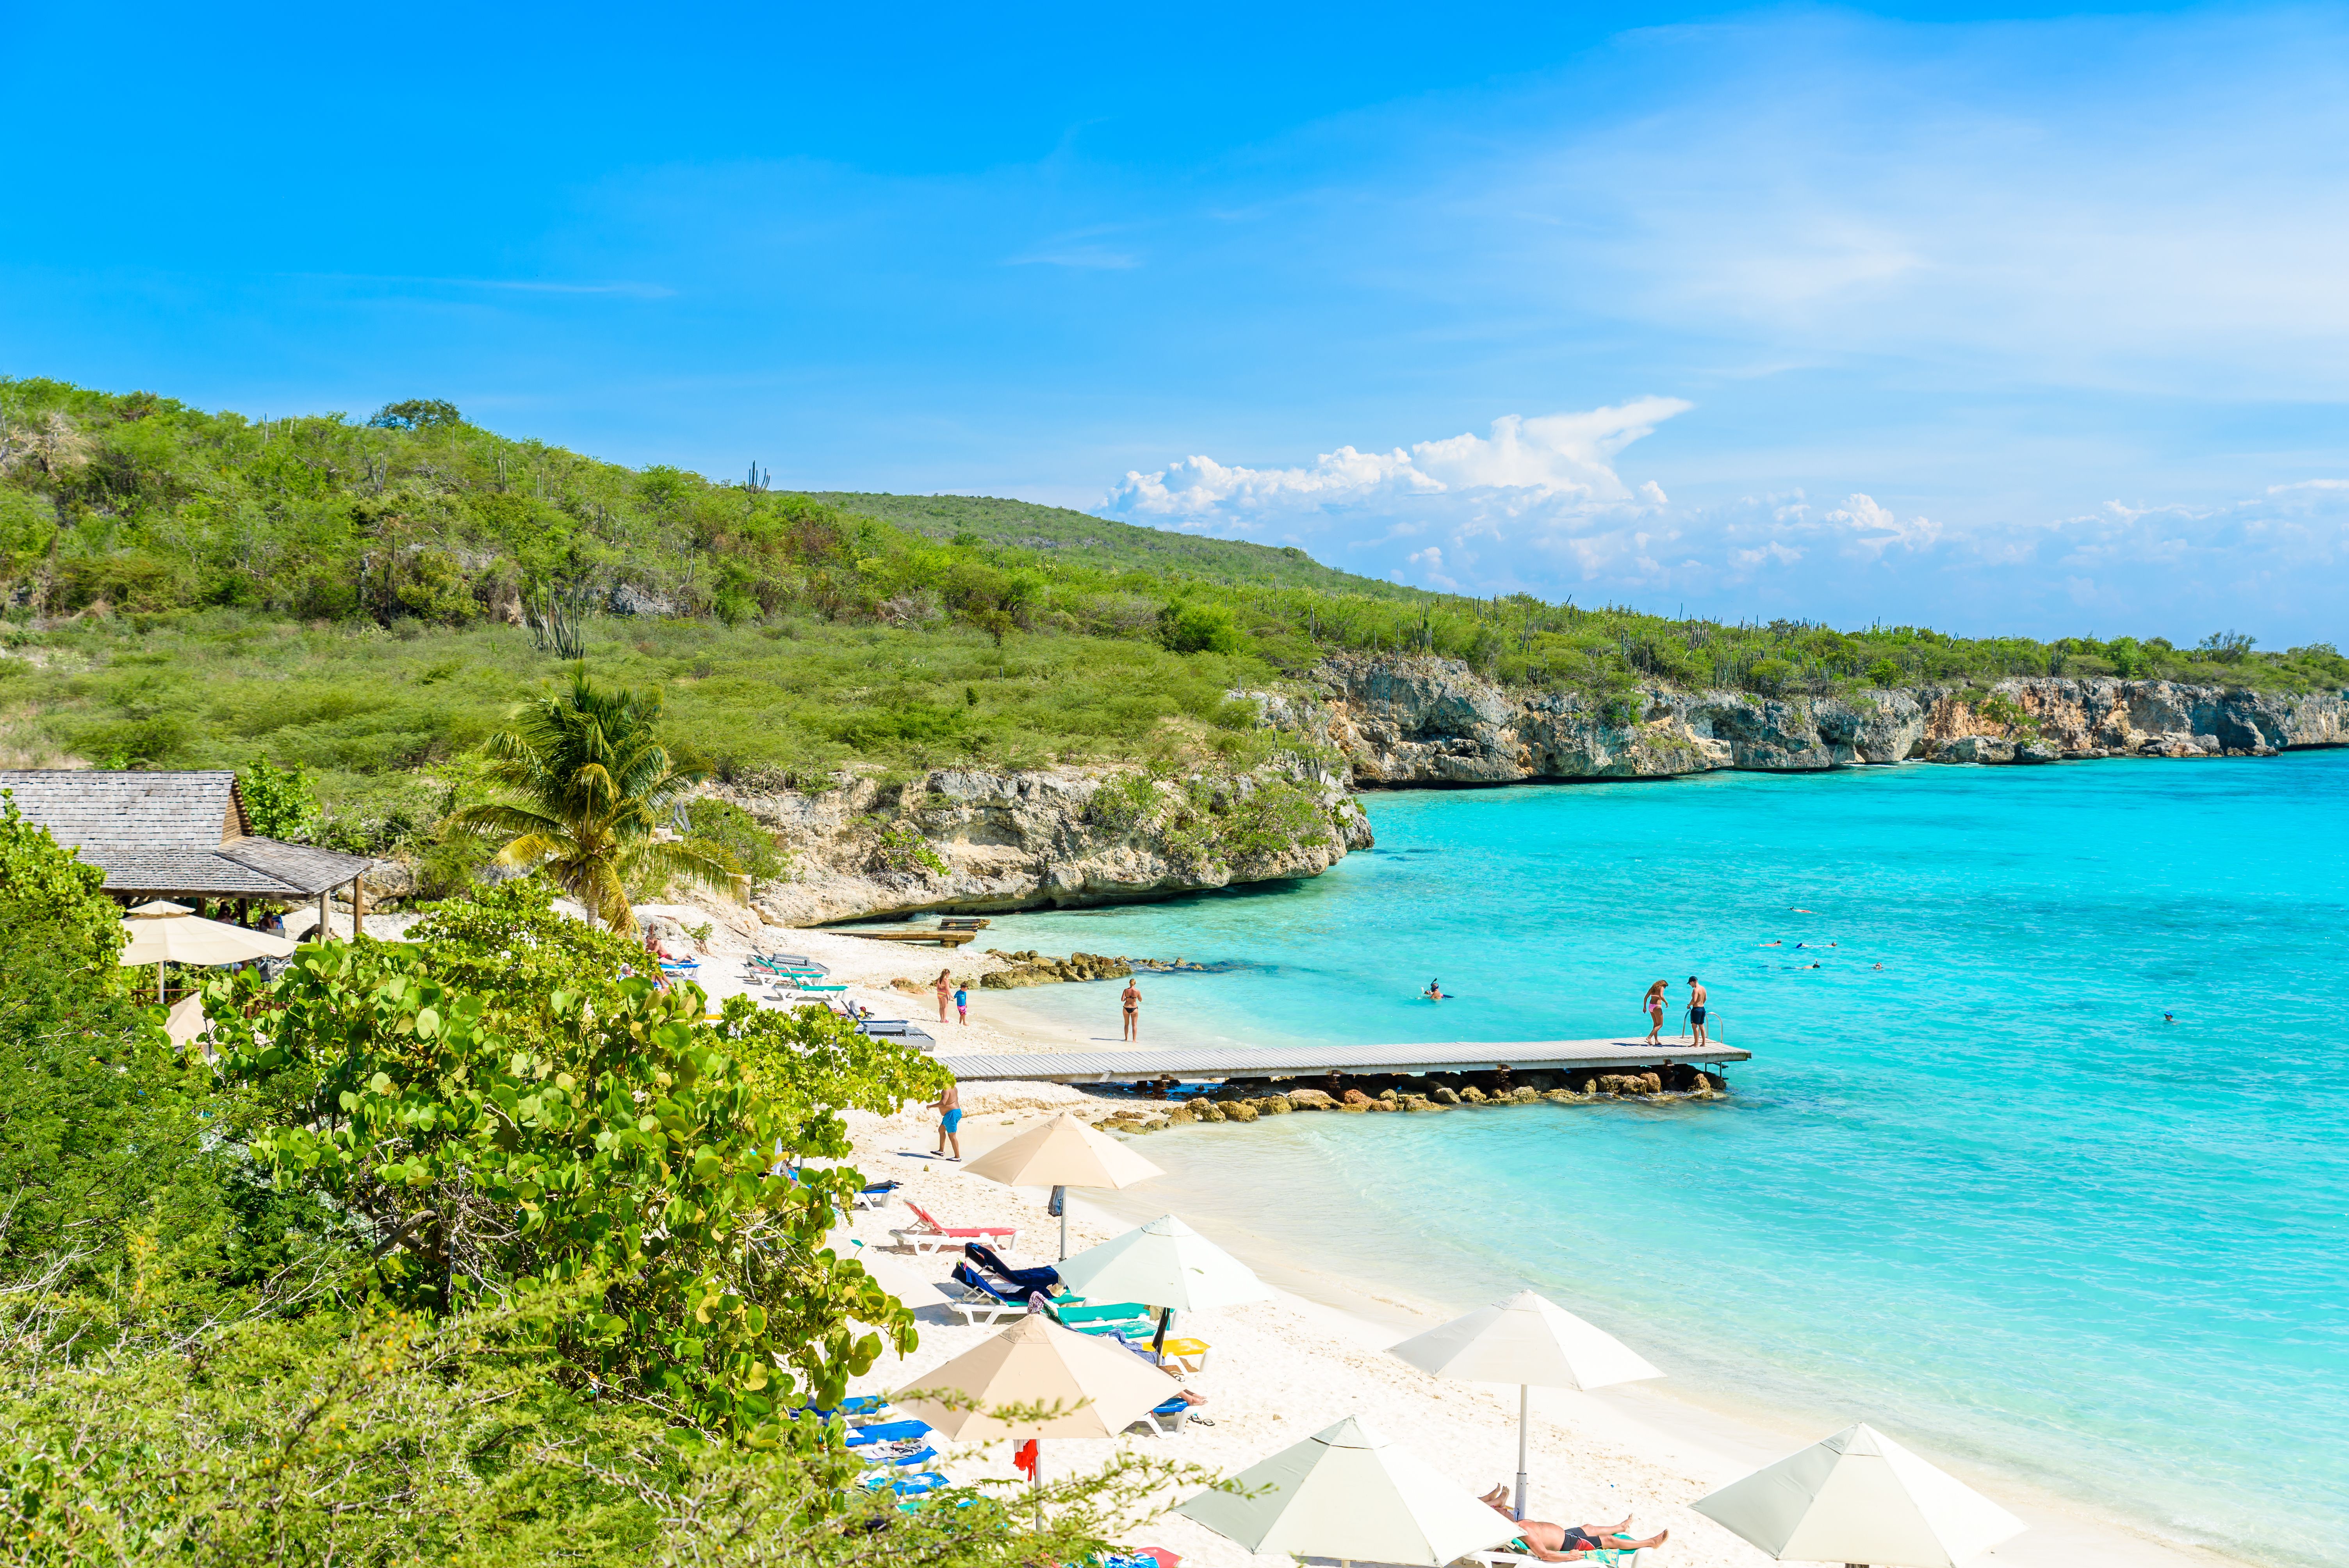 Scenic view of Playa Porto Mari in Curacao featuring white sandy beaches, turquoise waters, a wooden pier, sunbathers, and lush green hills in the background.